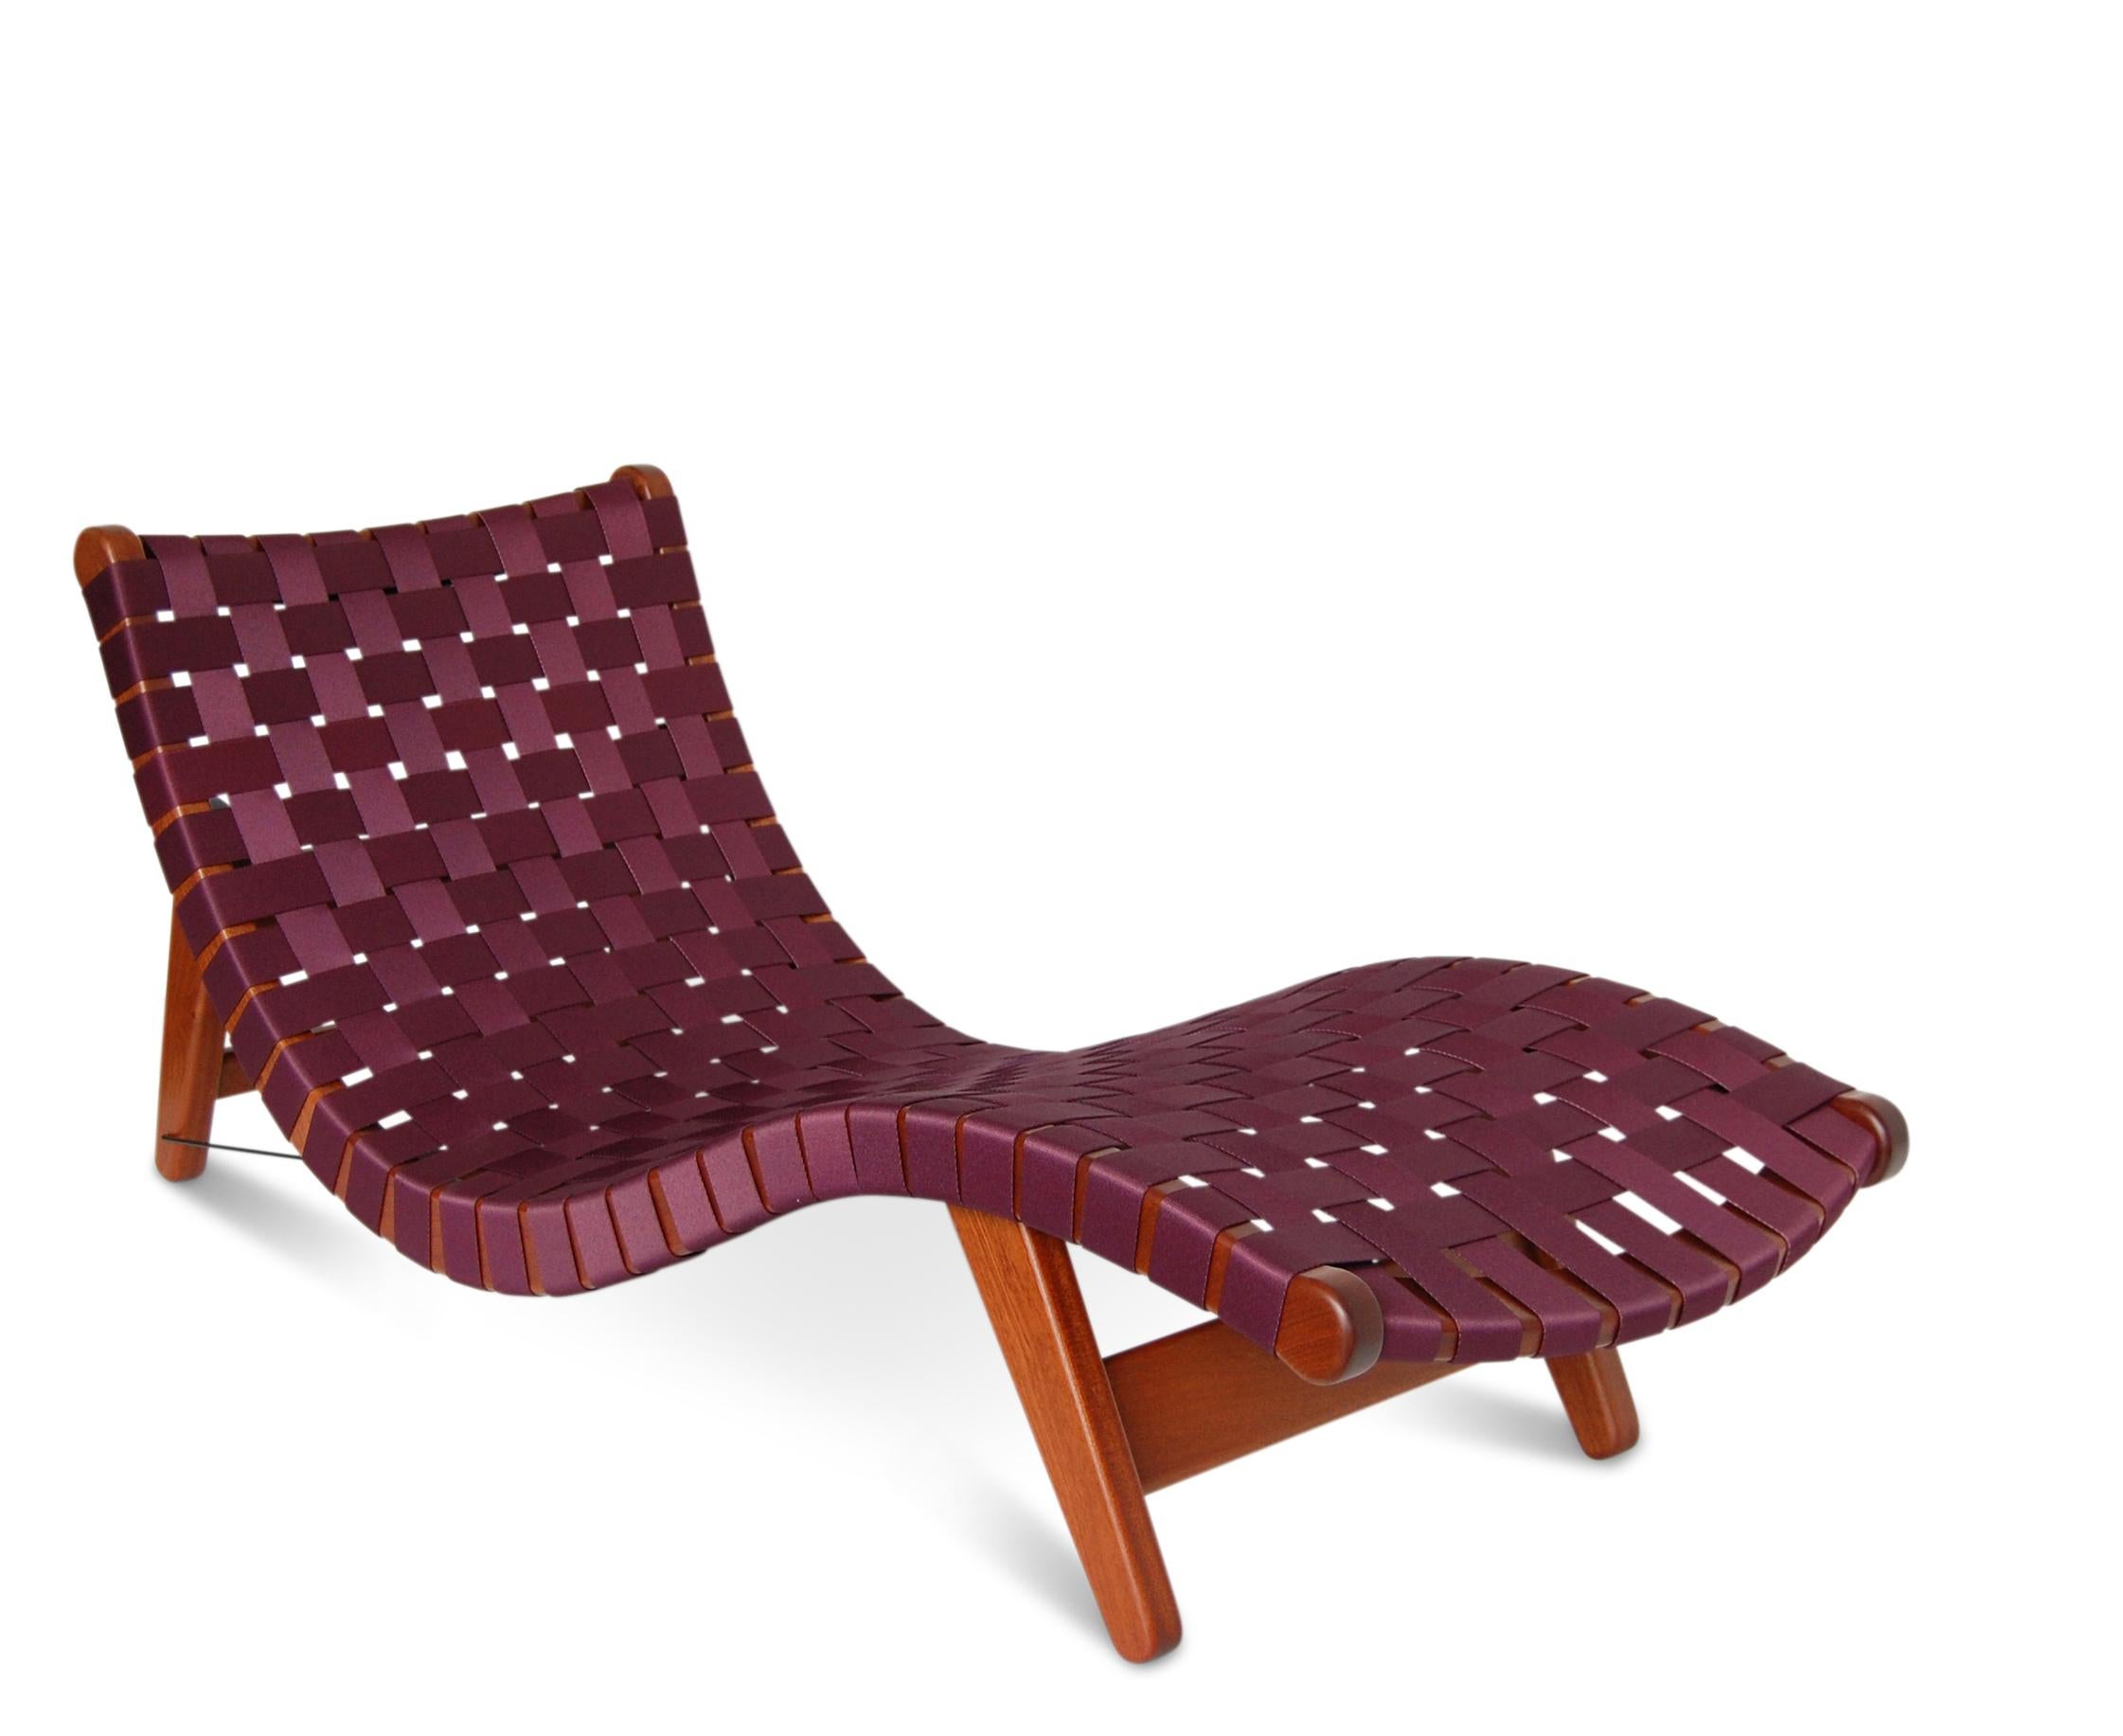 The Alacrán Chaise is an iconic, award-winning, midcentury design by the American Bauhaus trained designer Michael van Beuren. Realized during his lifetime in Mexico, it was one of the winning designs of MoMA’s 1941 “Organic Design and Home